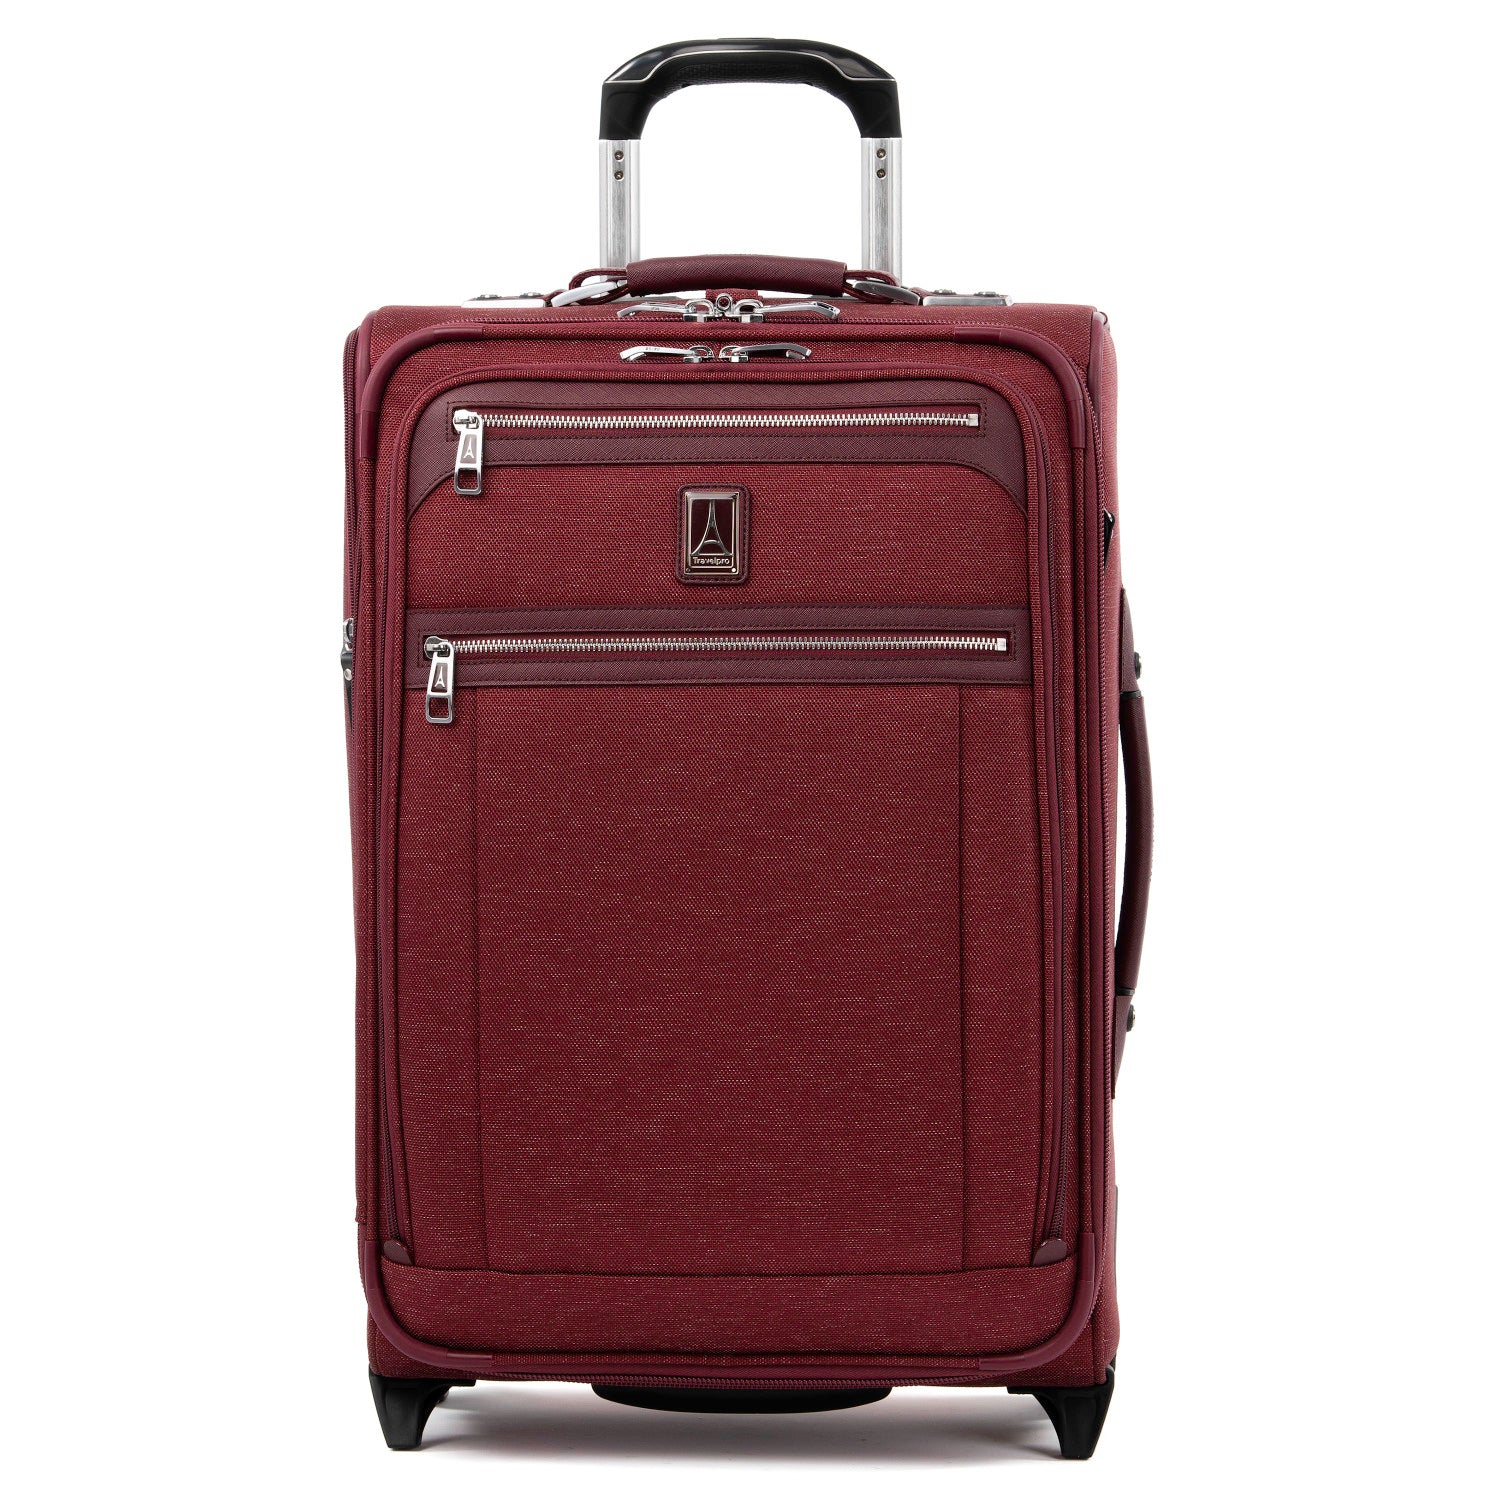 Travelpro Crew Expert Global Carry-On Expandable Rollaboard